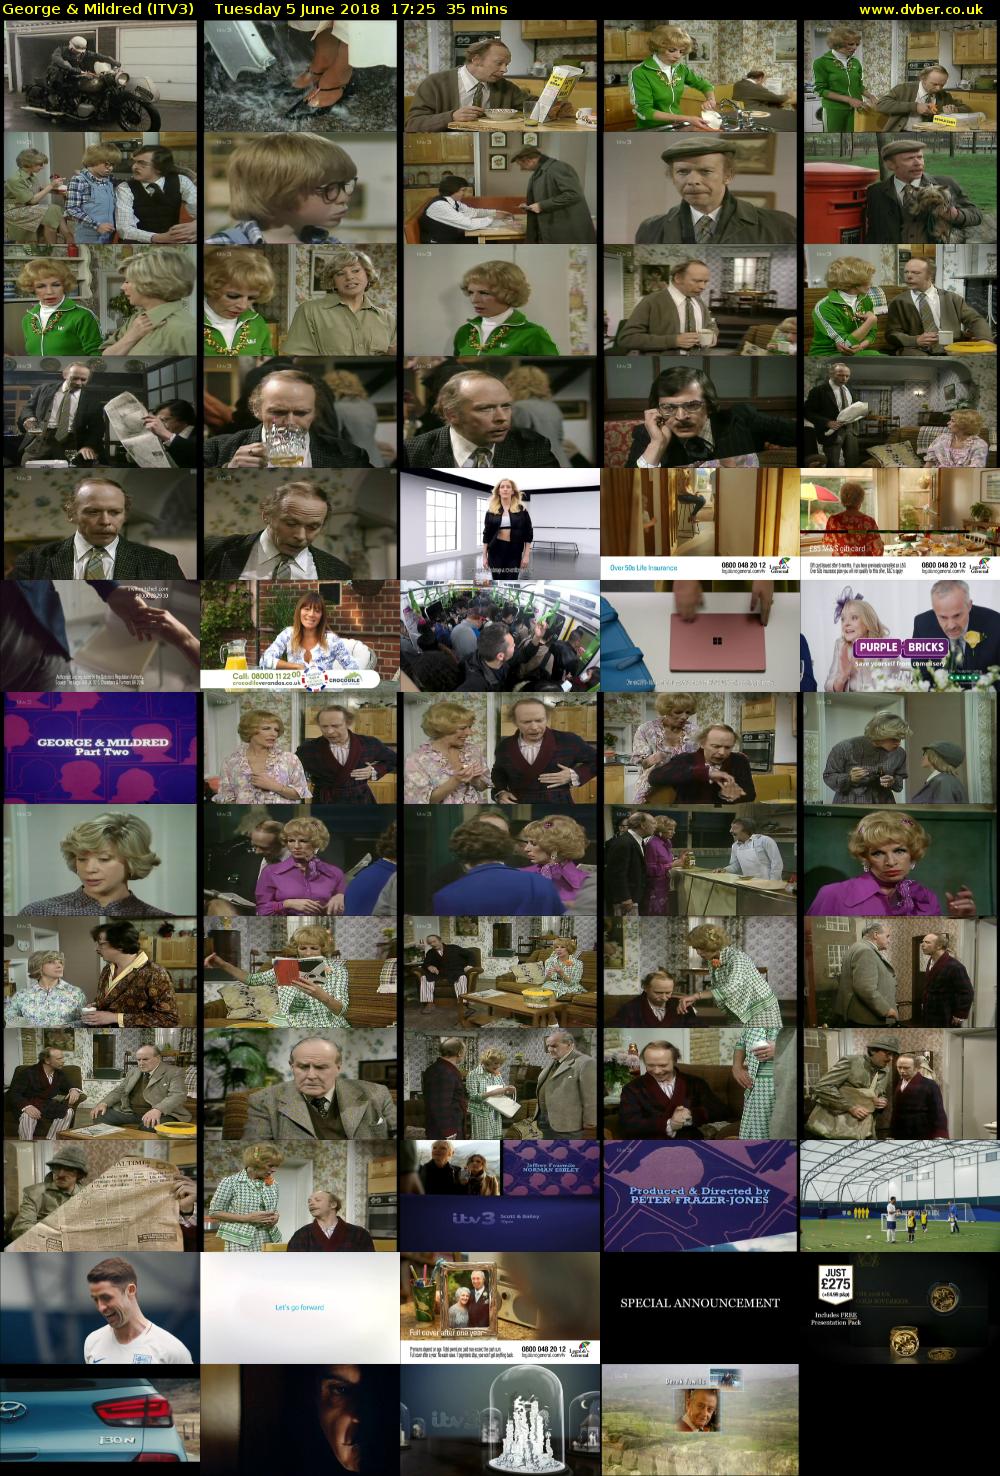 George & Mildred (ITV3) Tuesday 5 June 2018 17:25 - 18:00